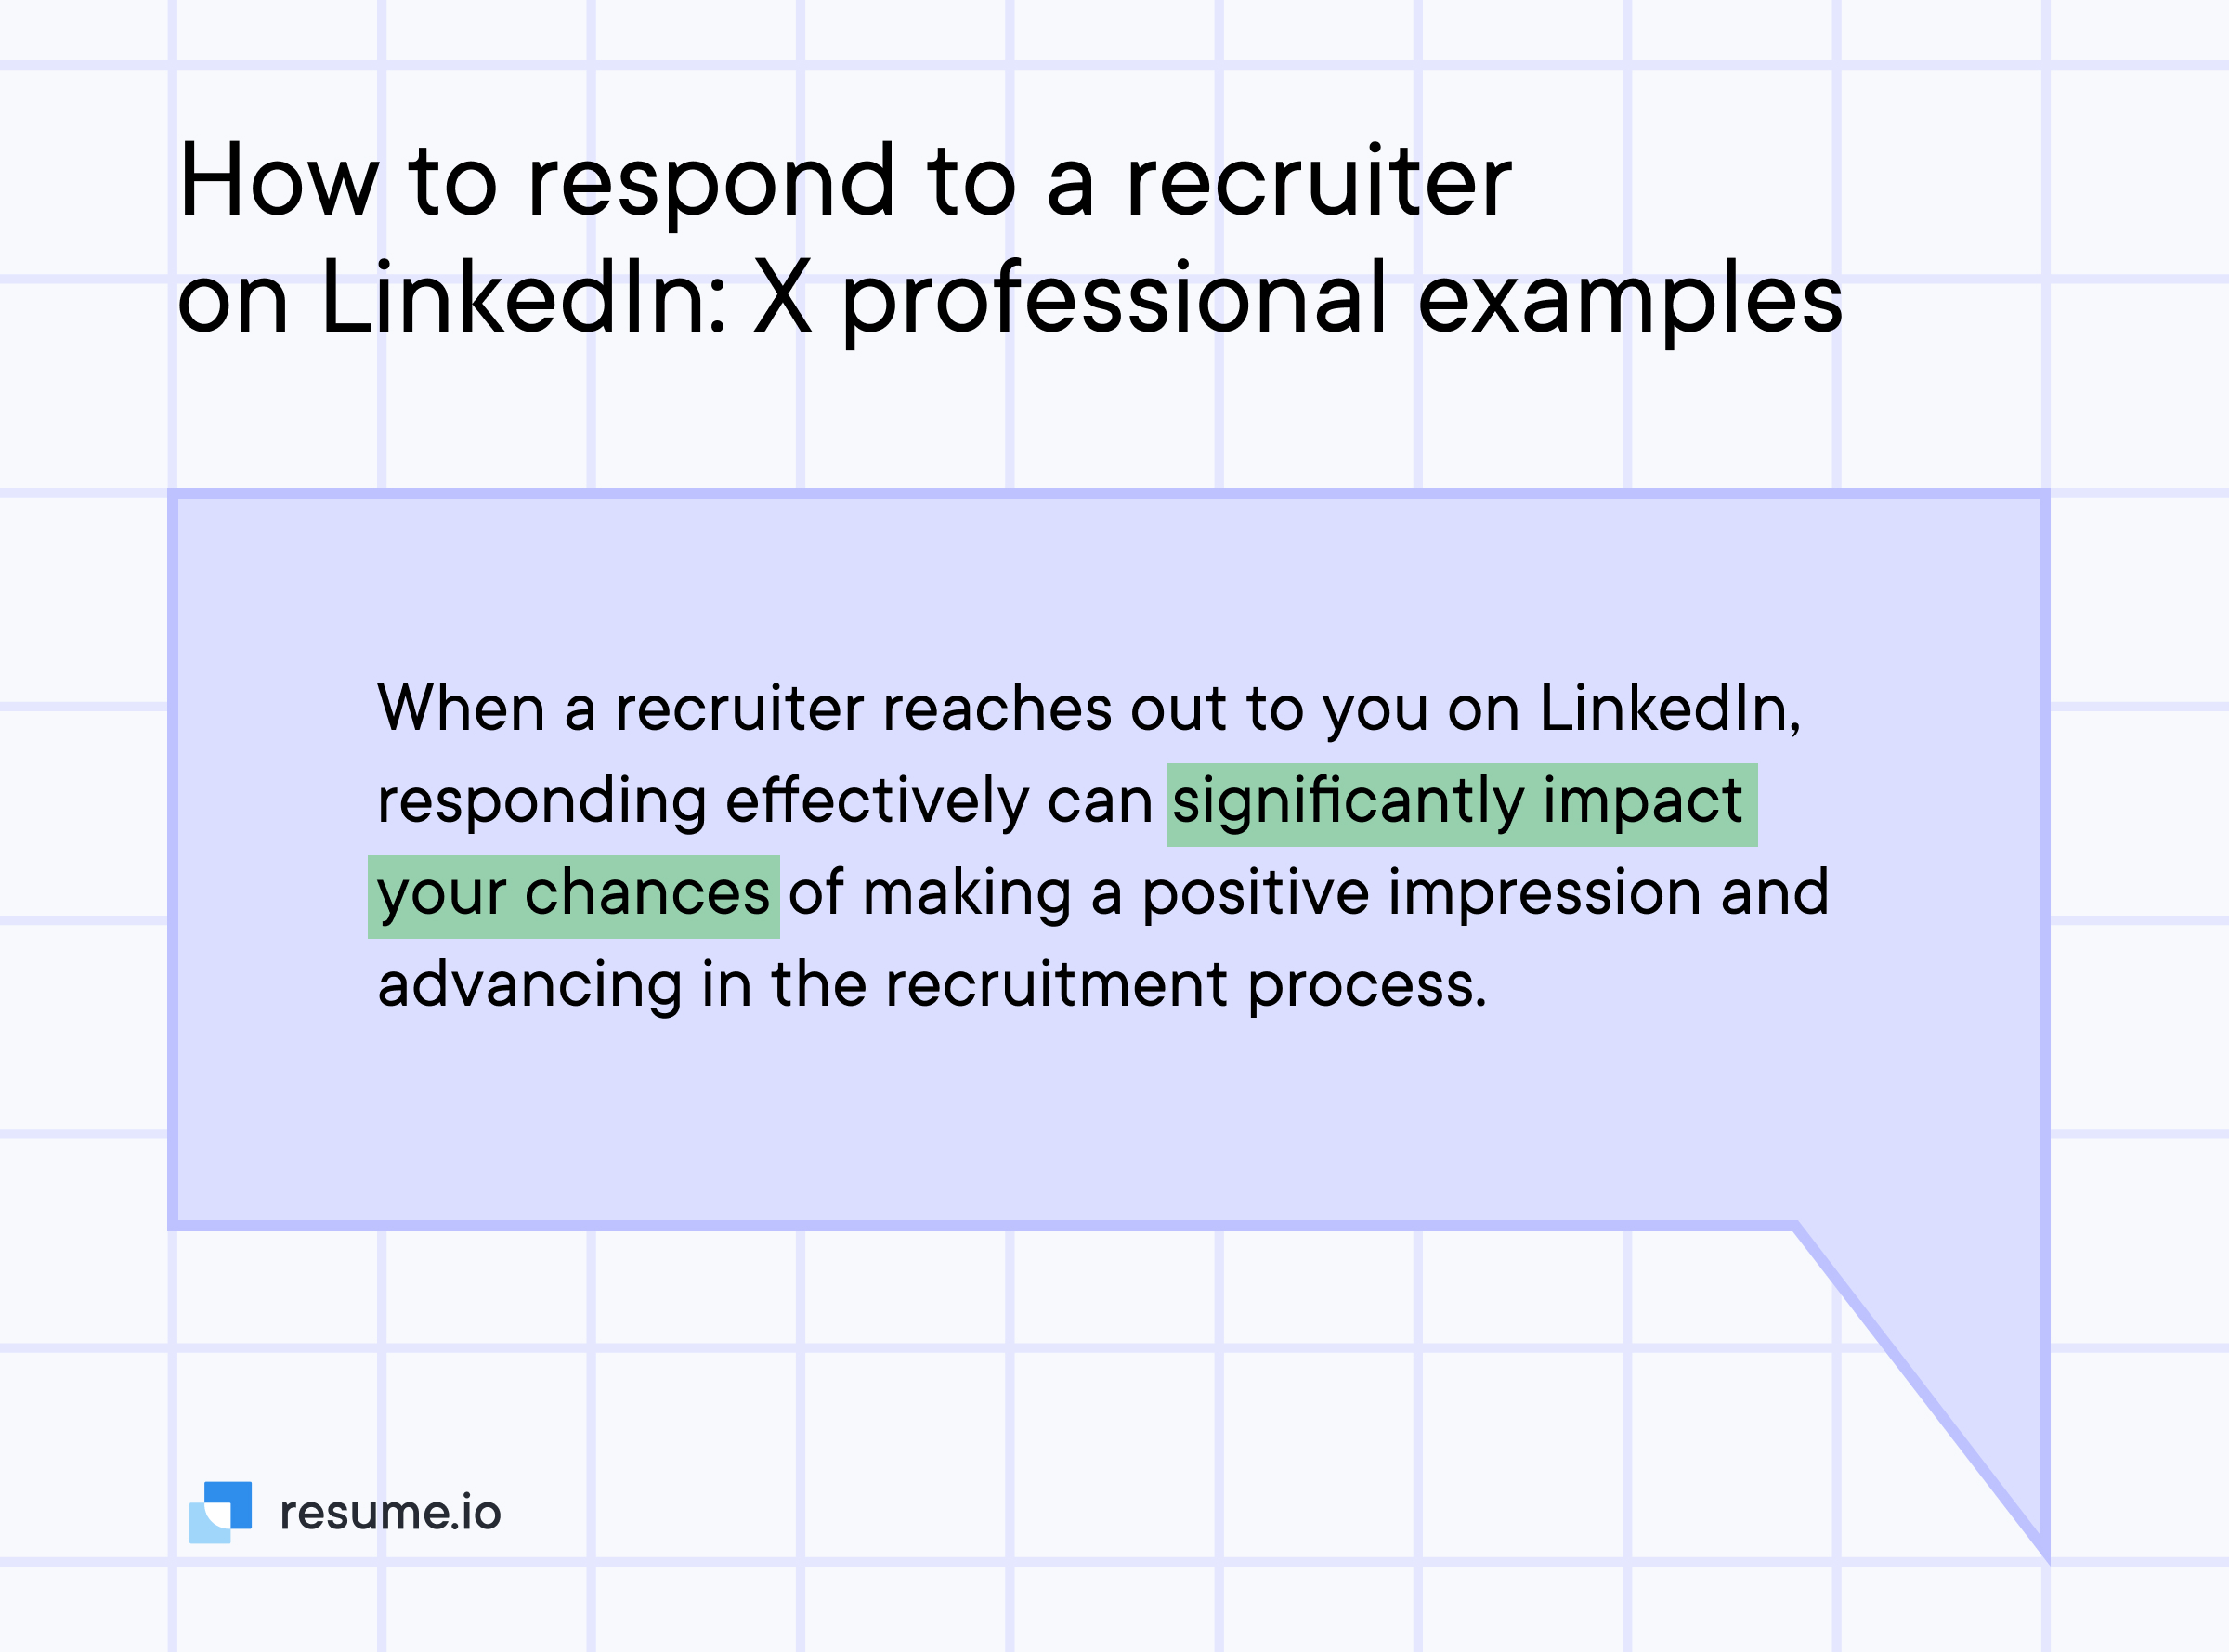 Responding effectively on LinkedIn can significantly impact your chances